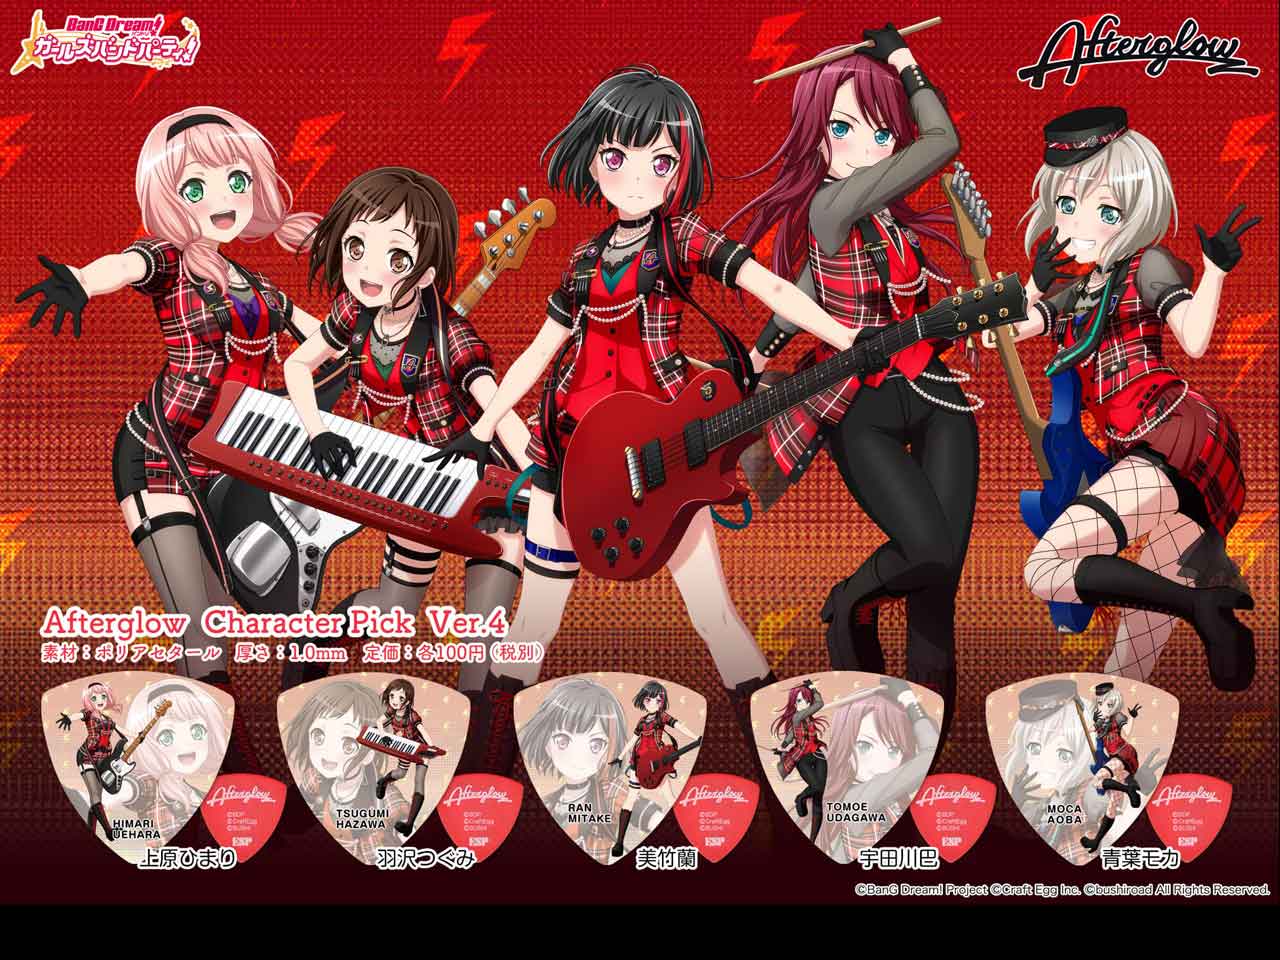 【ESP×BanG Dream!コラボピック】Afterglow Character Pick Ver.4 "青葉モカ"10枚セット（GBP MOCA AFTERGLOW 4）